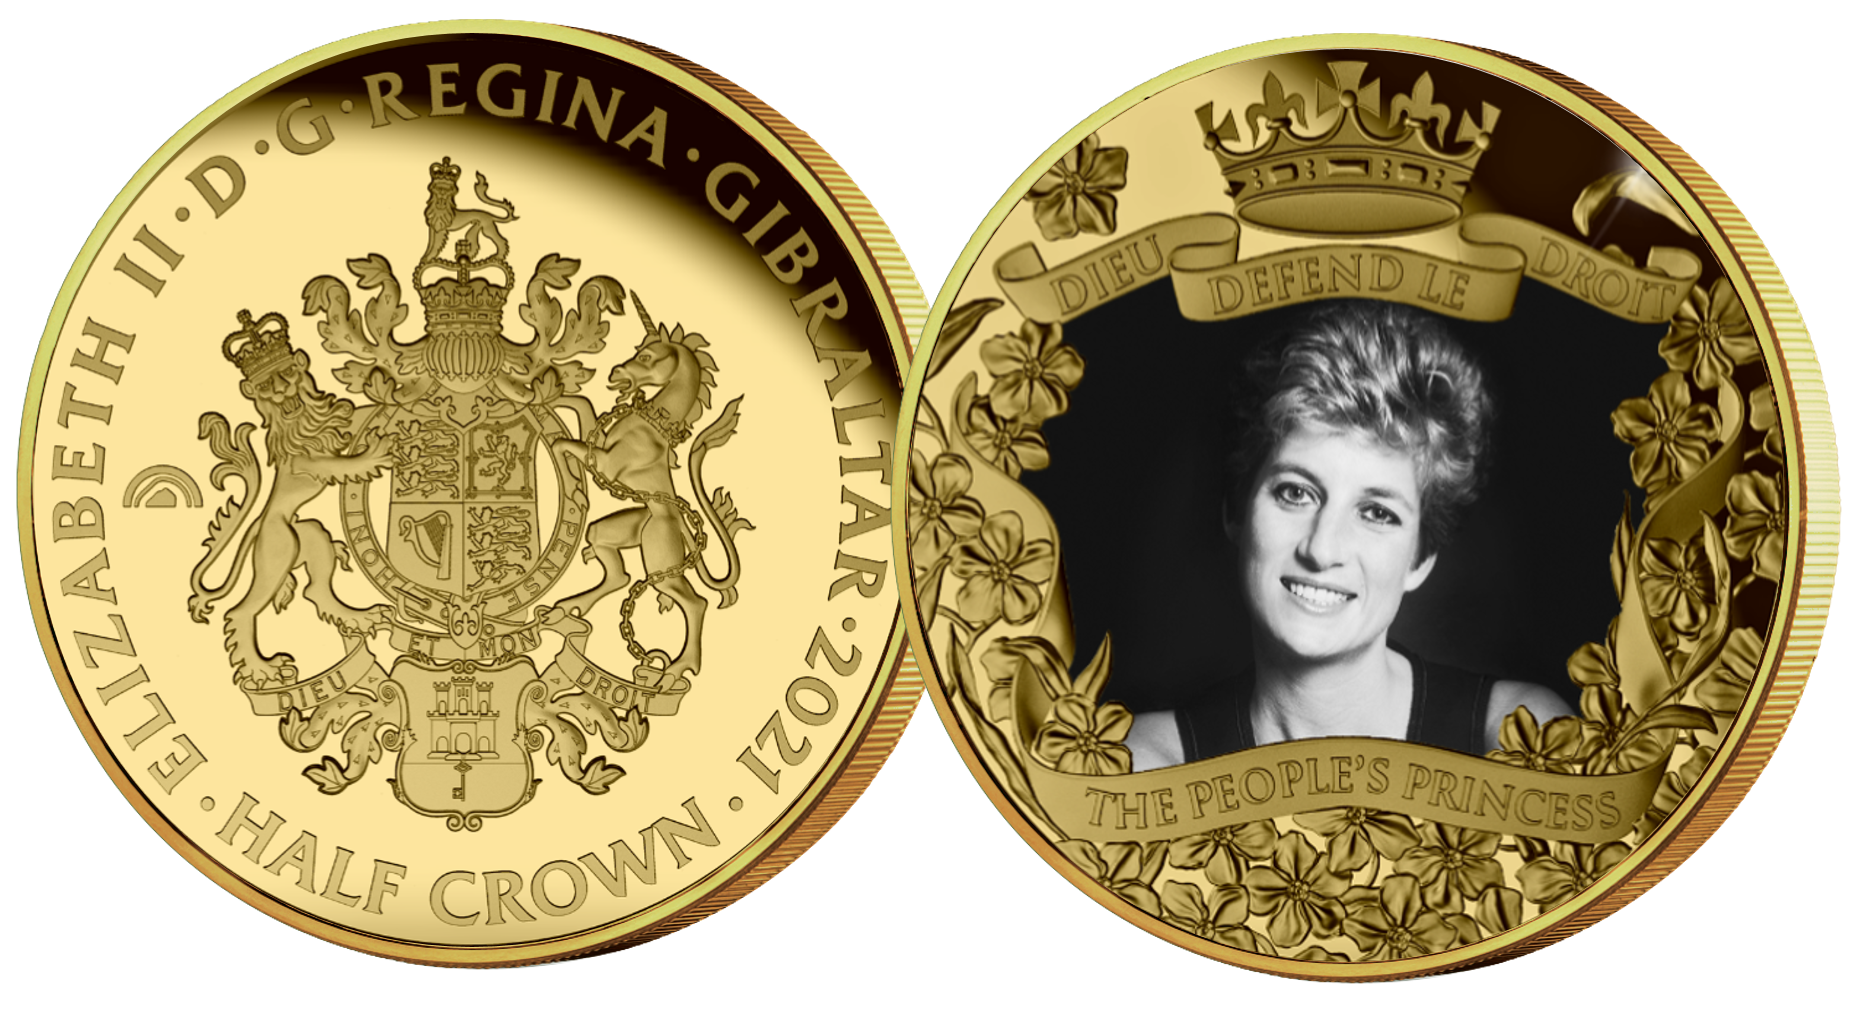 The coin features a beautiful and timeless photograph of Diana, Princess of Wales, and is elegantly framed by a shower of forget-me-nots – Diana’s favourite flowers.